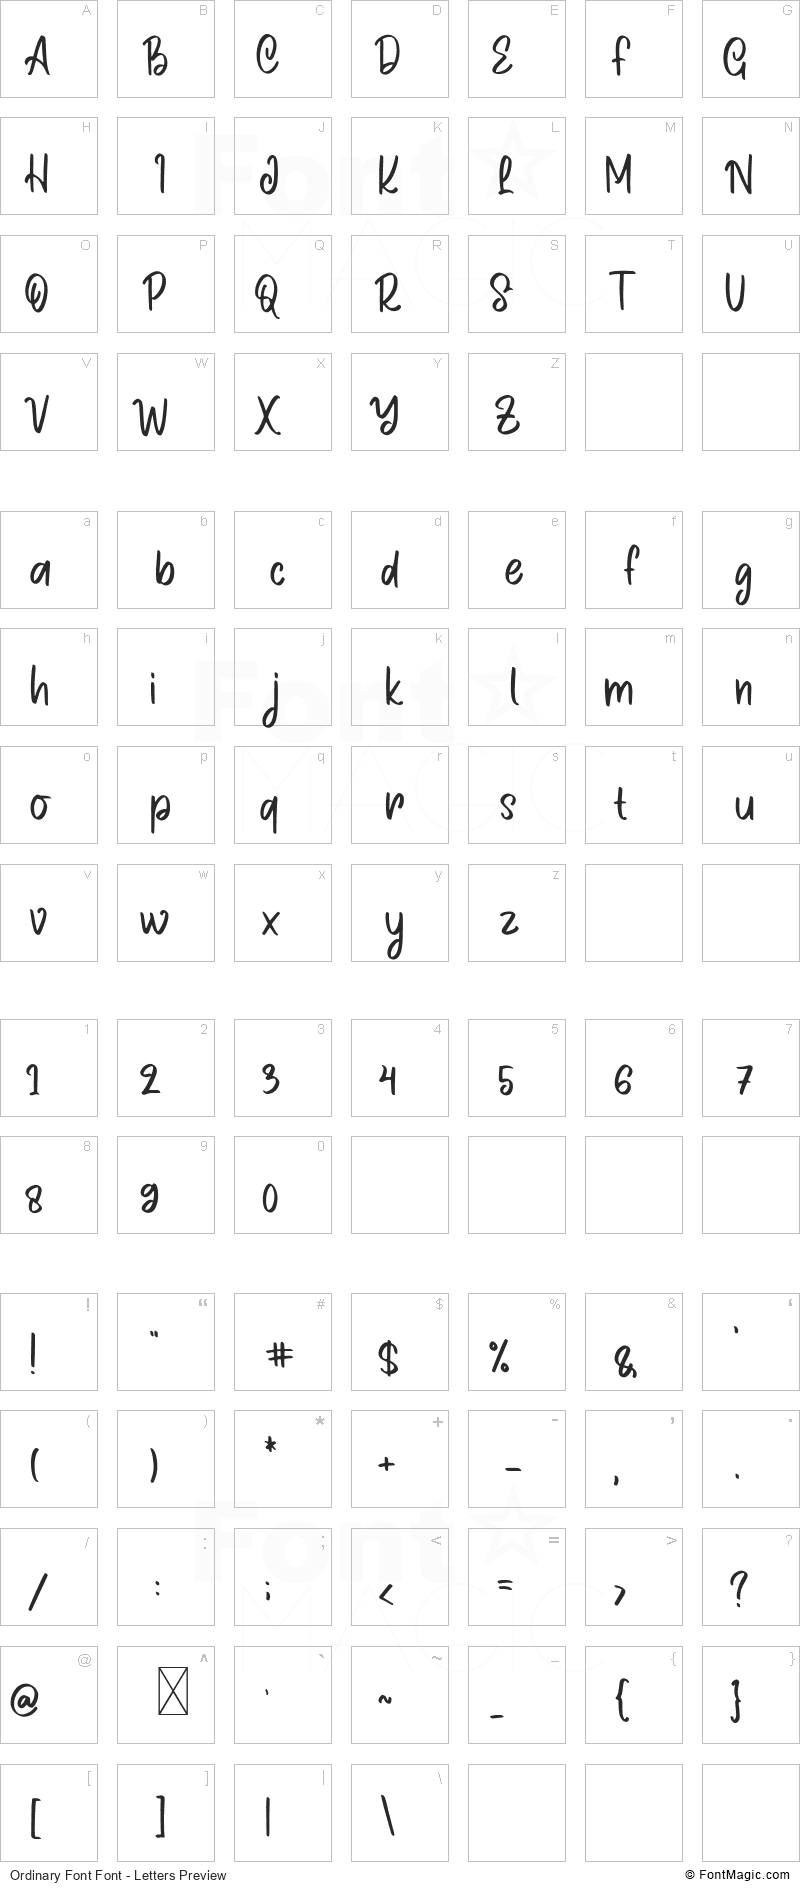 Ordinary Font Font - All Latters Preview Chart